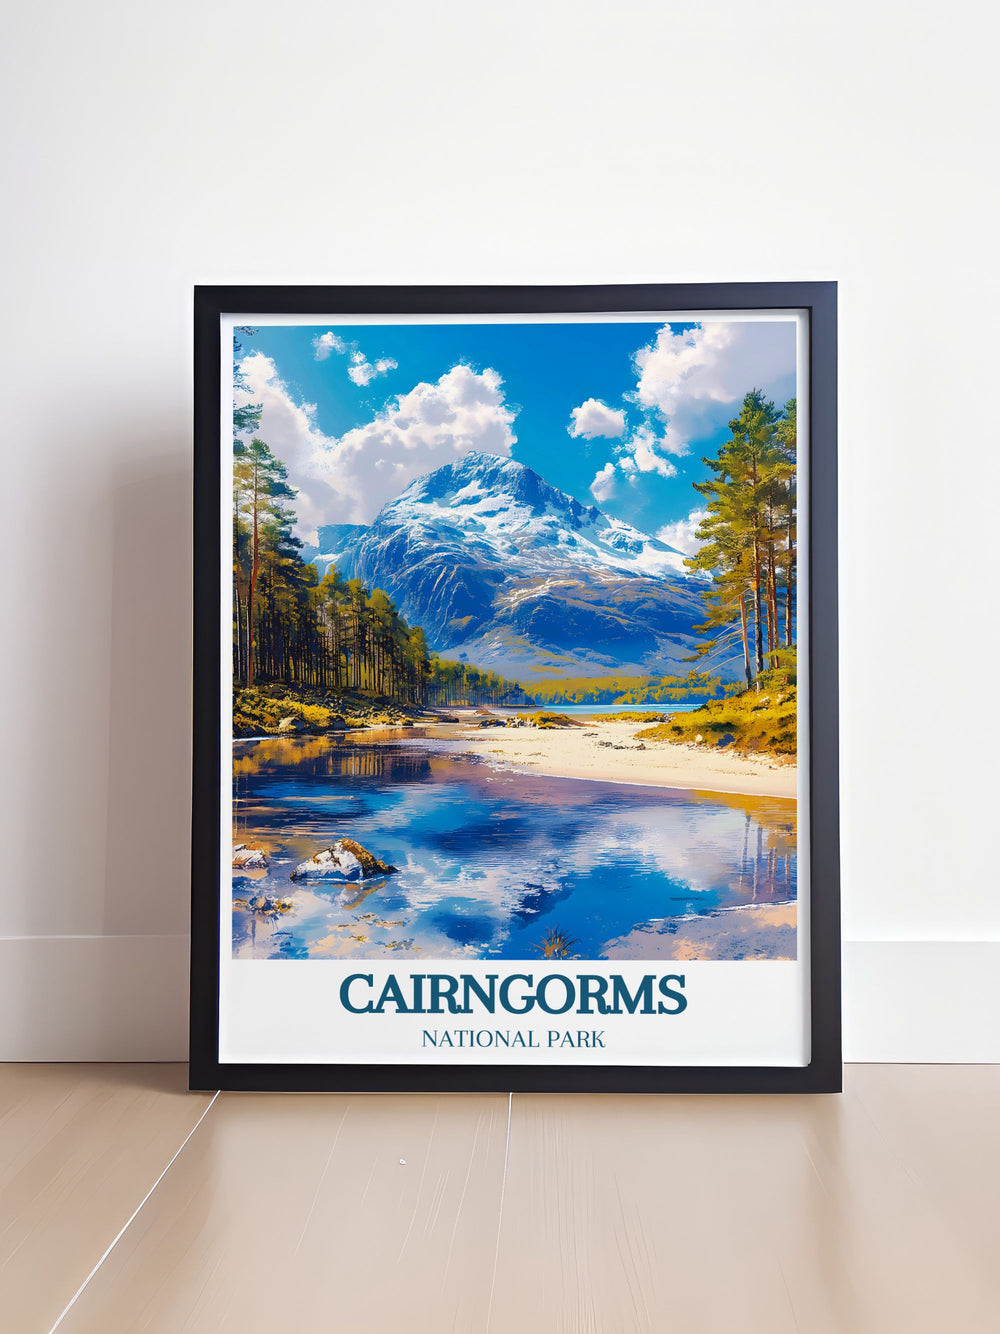 Featuring lush landscapes of Cairngorms National Park and the iconic Cairngorm Mountain, this poster is ideal for those who wish to bring a piece of Scotlands natural beauty into their home.